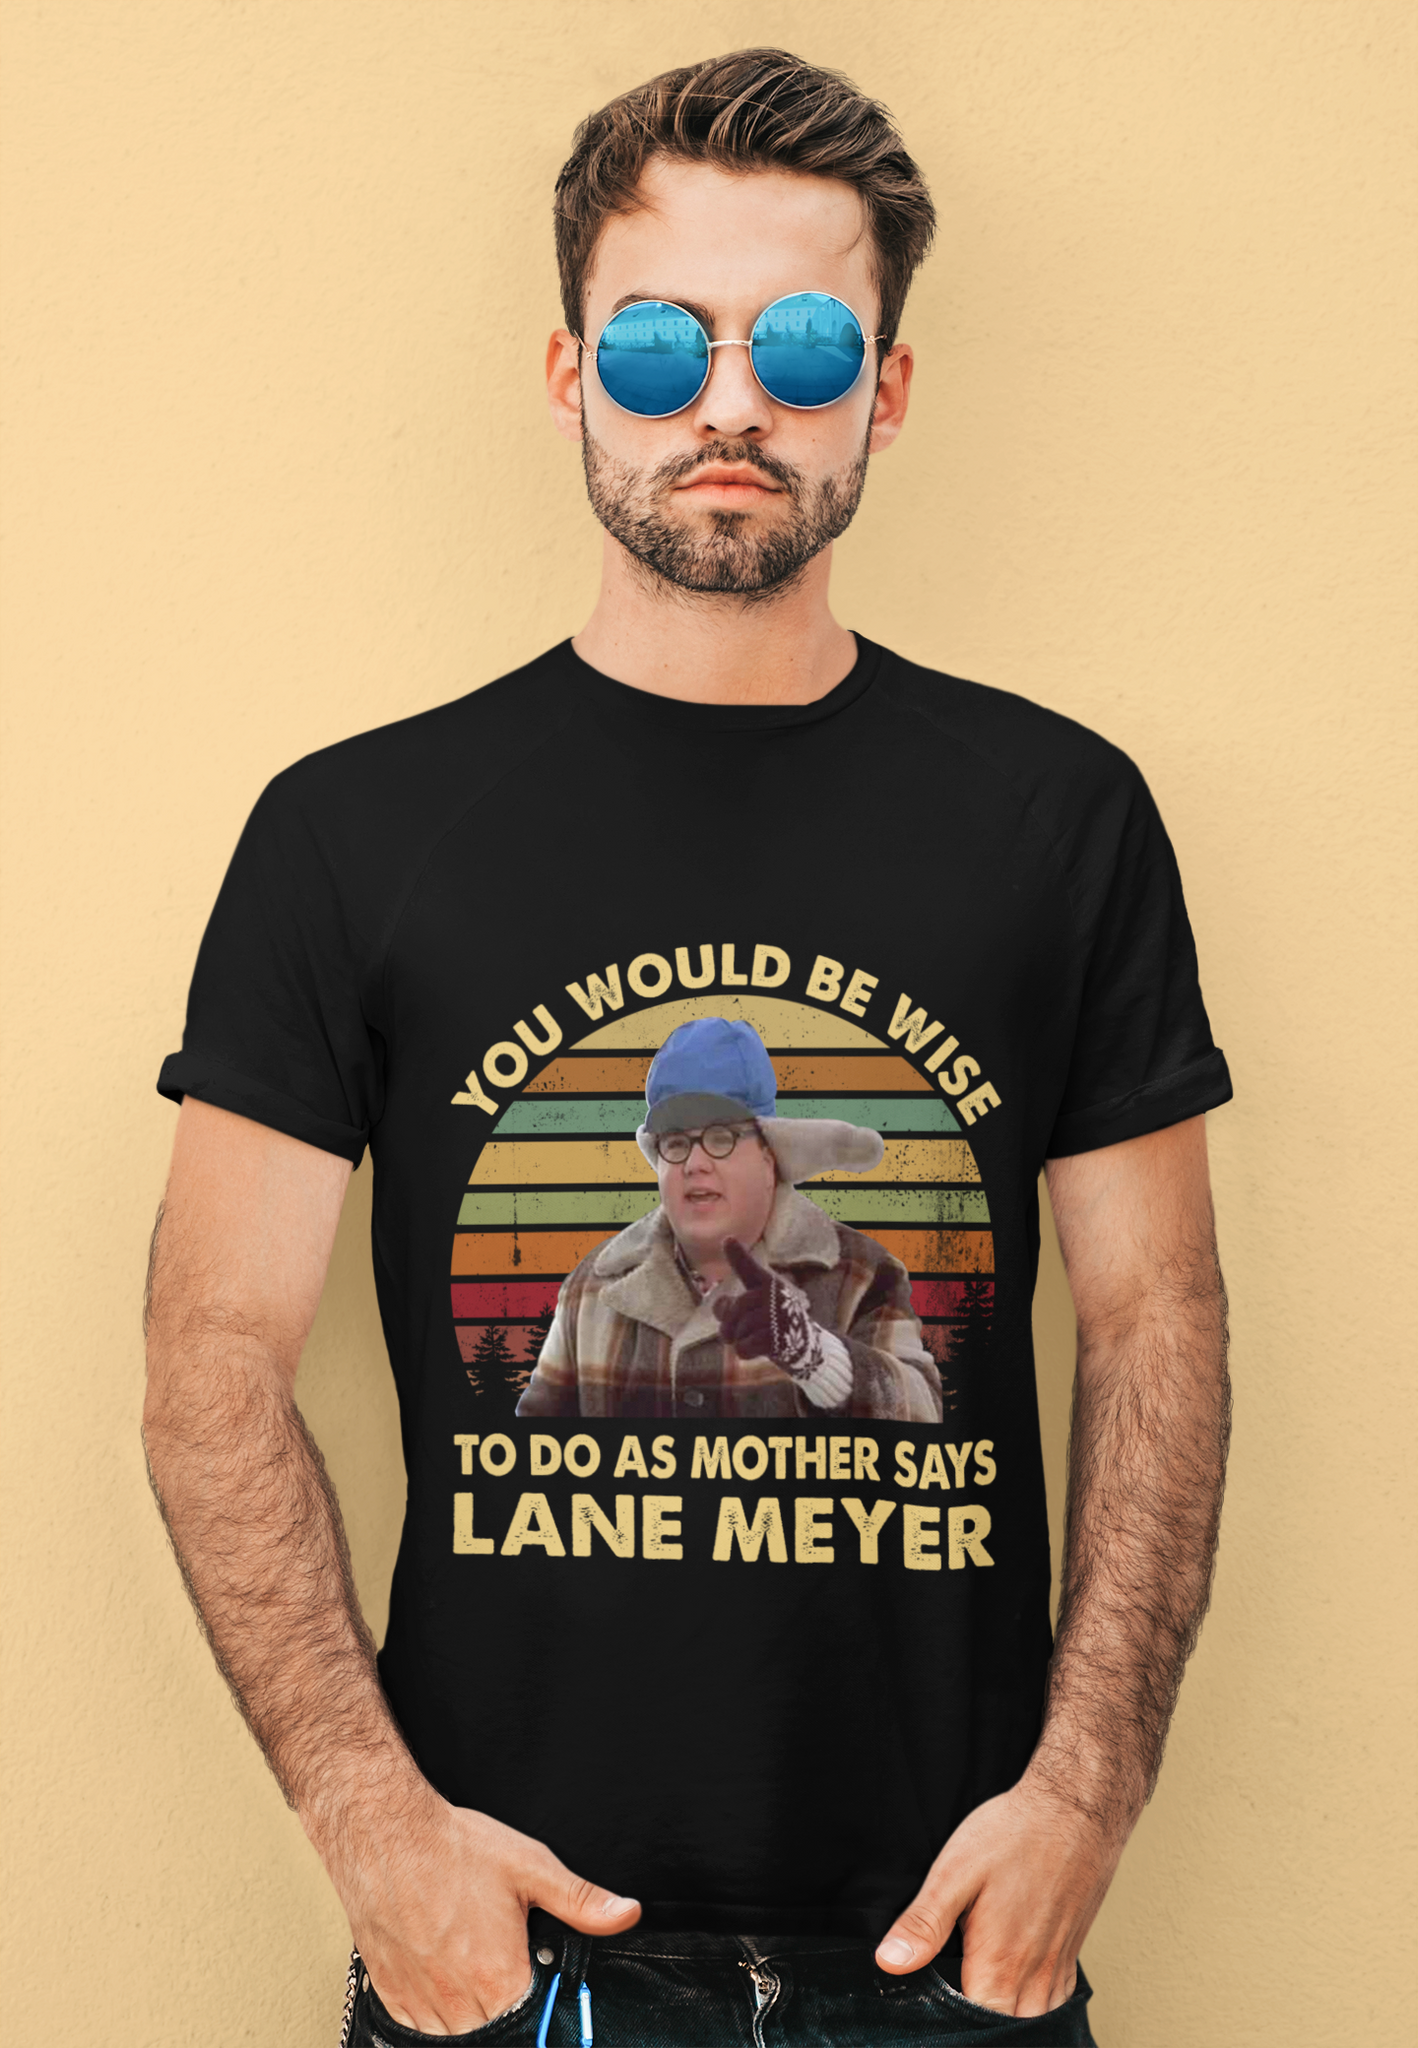 Better Off Dead Comedy Film T Shirt, Ricky Smith T Shirt, You Would Be Wise To Do As Mother Says Tshirt